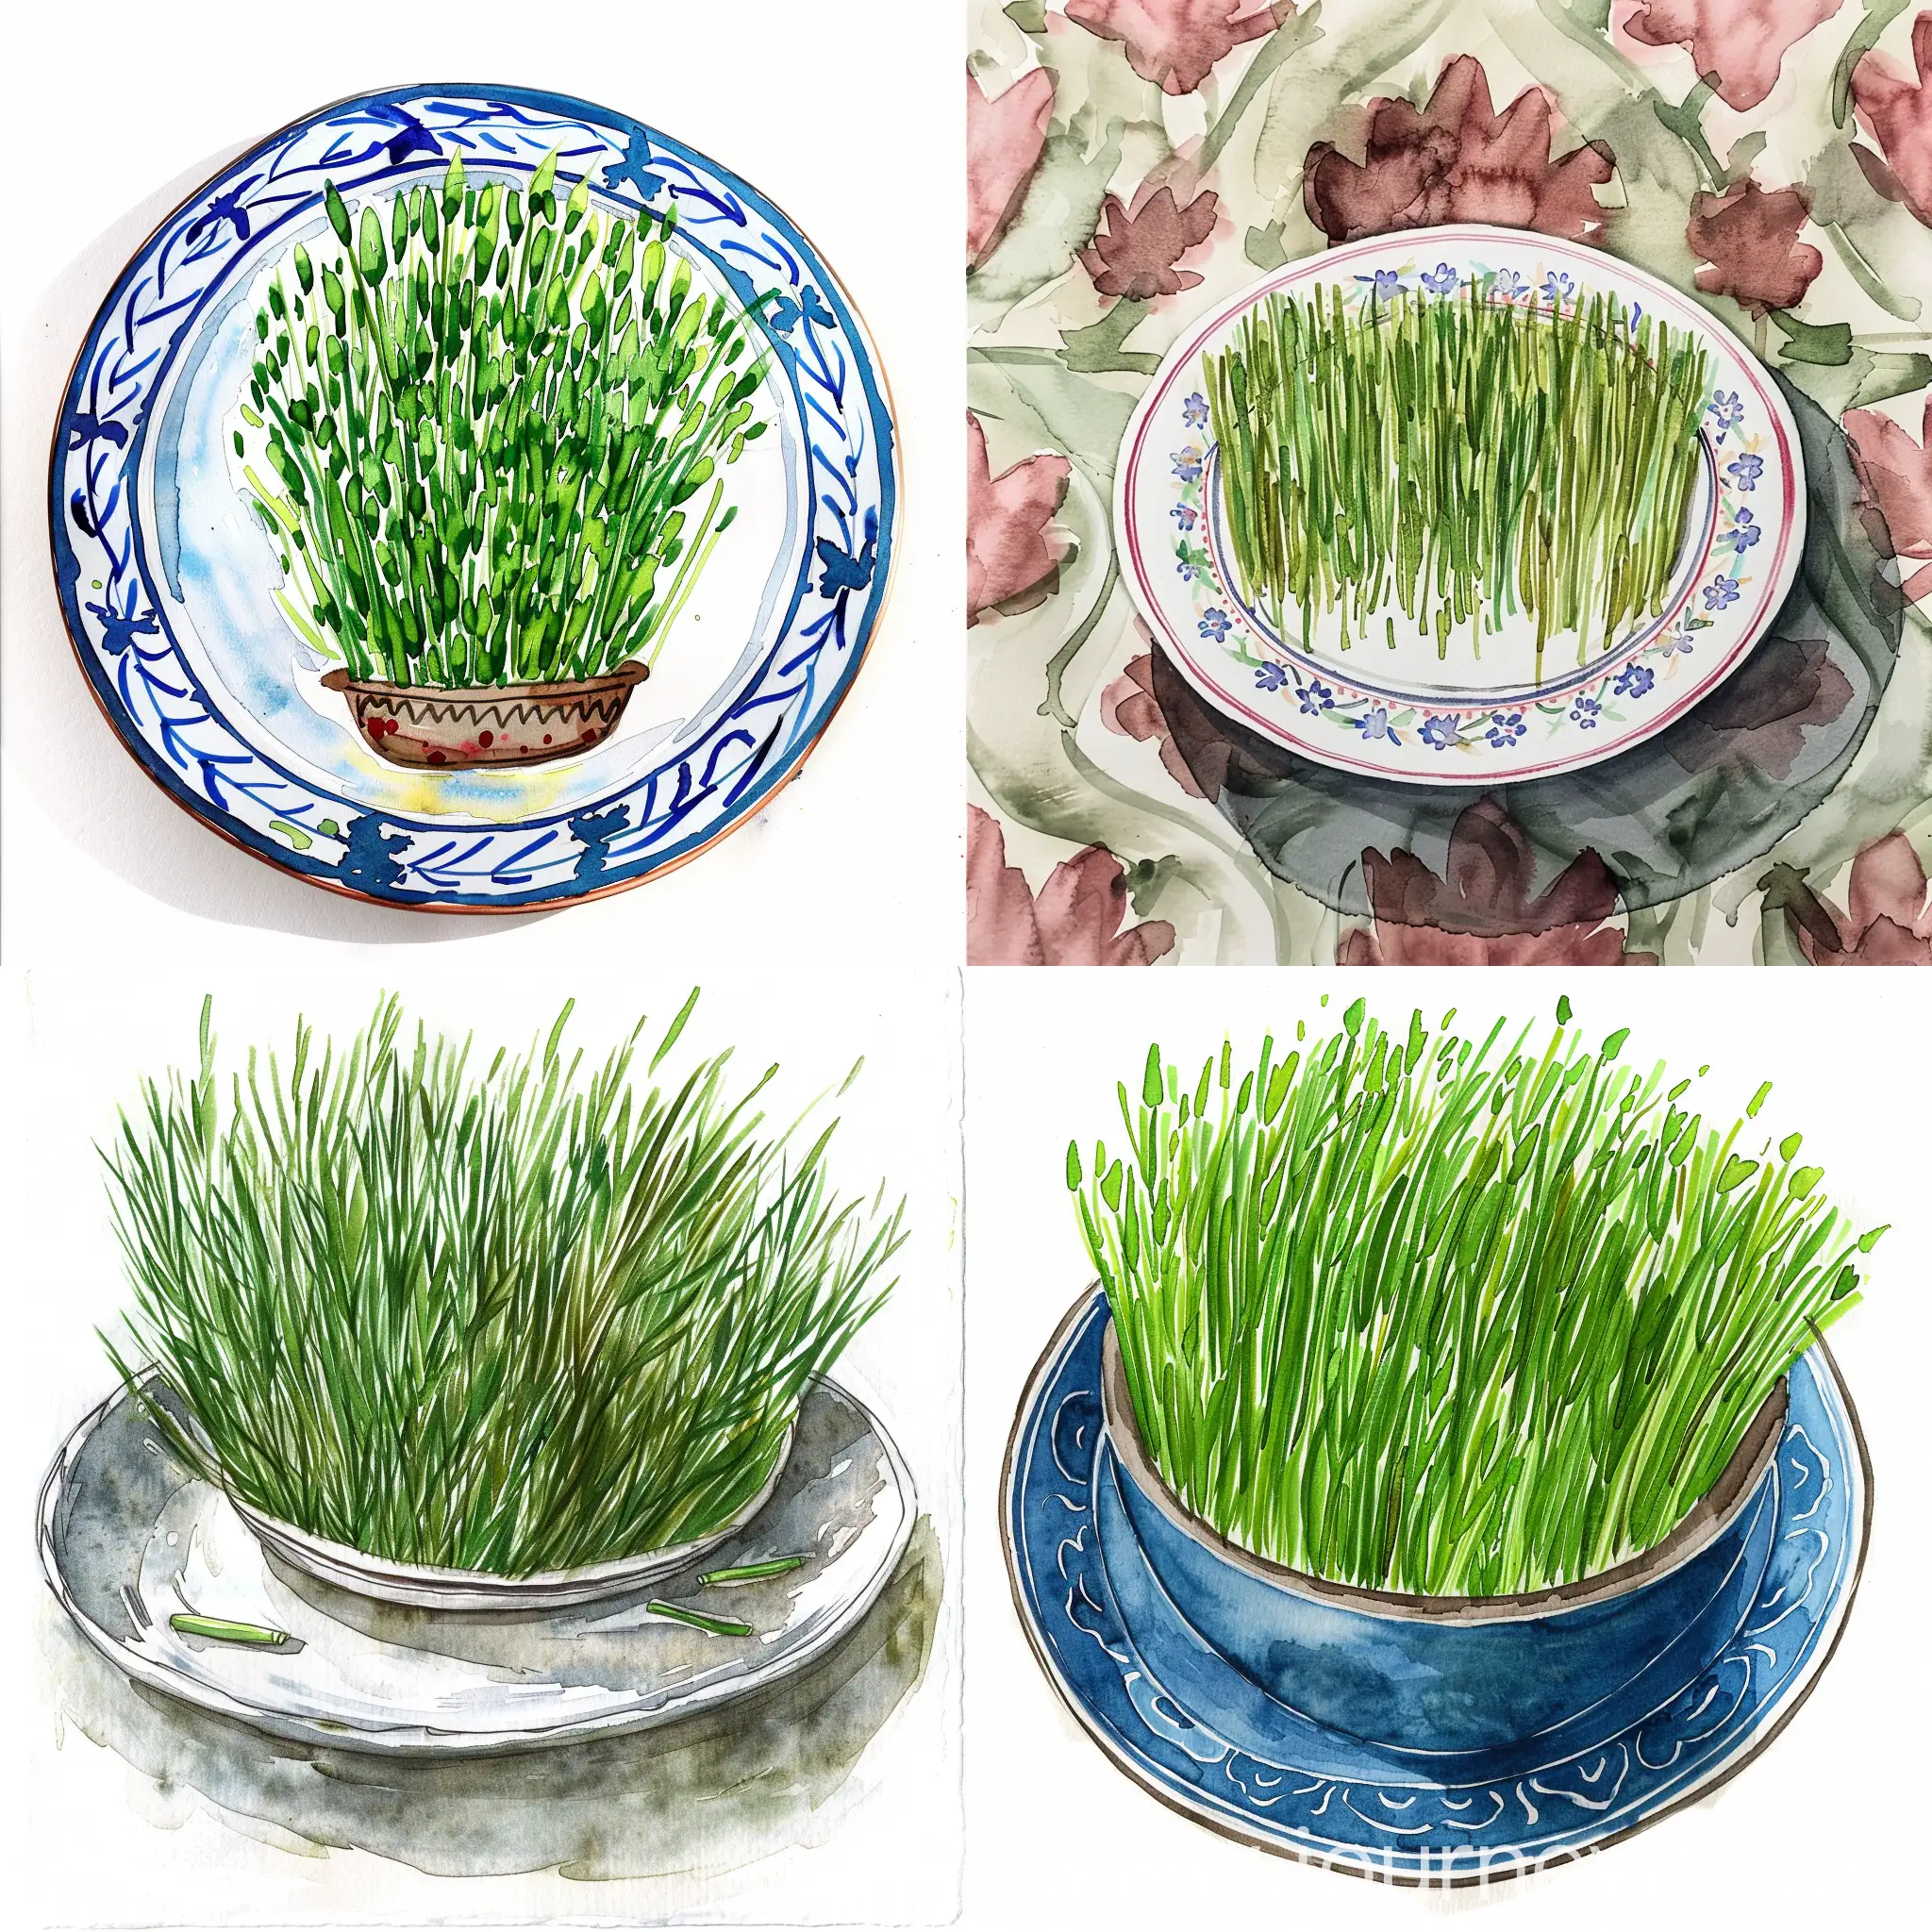 draw a watercolor of sumalak (the green grass prepared for Navruz holiday in Tajikstan) on the plate